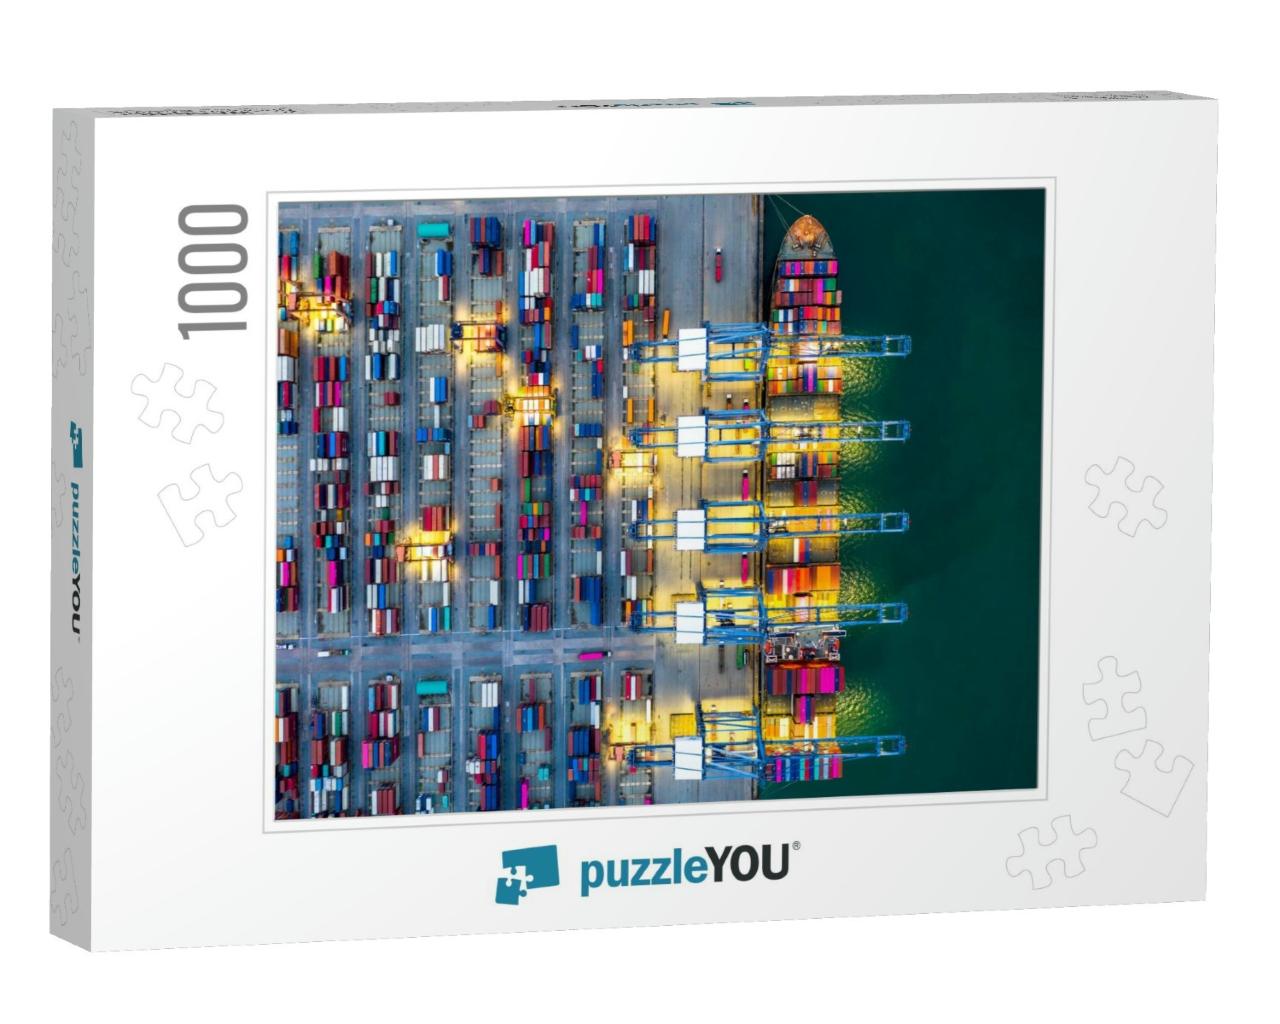 Container Ship Working At Night, Business Import Export L... Jigsaw Puzzle with 1000 pieces